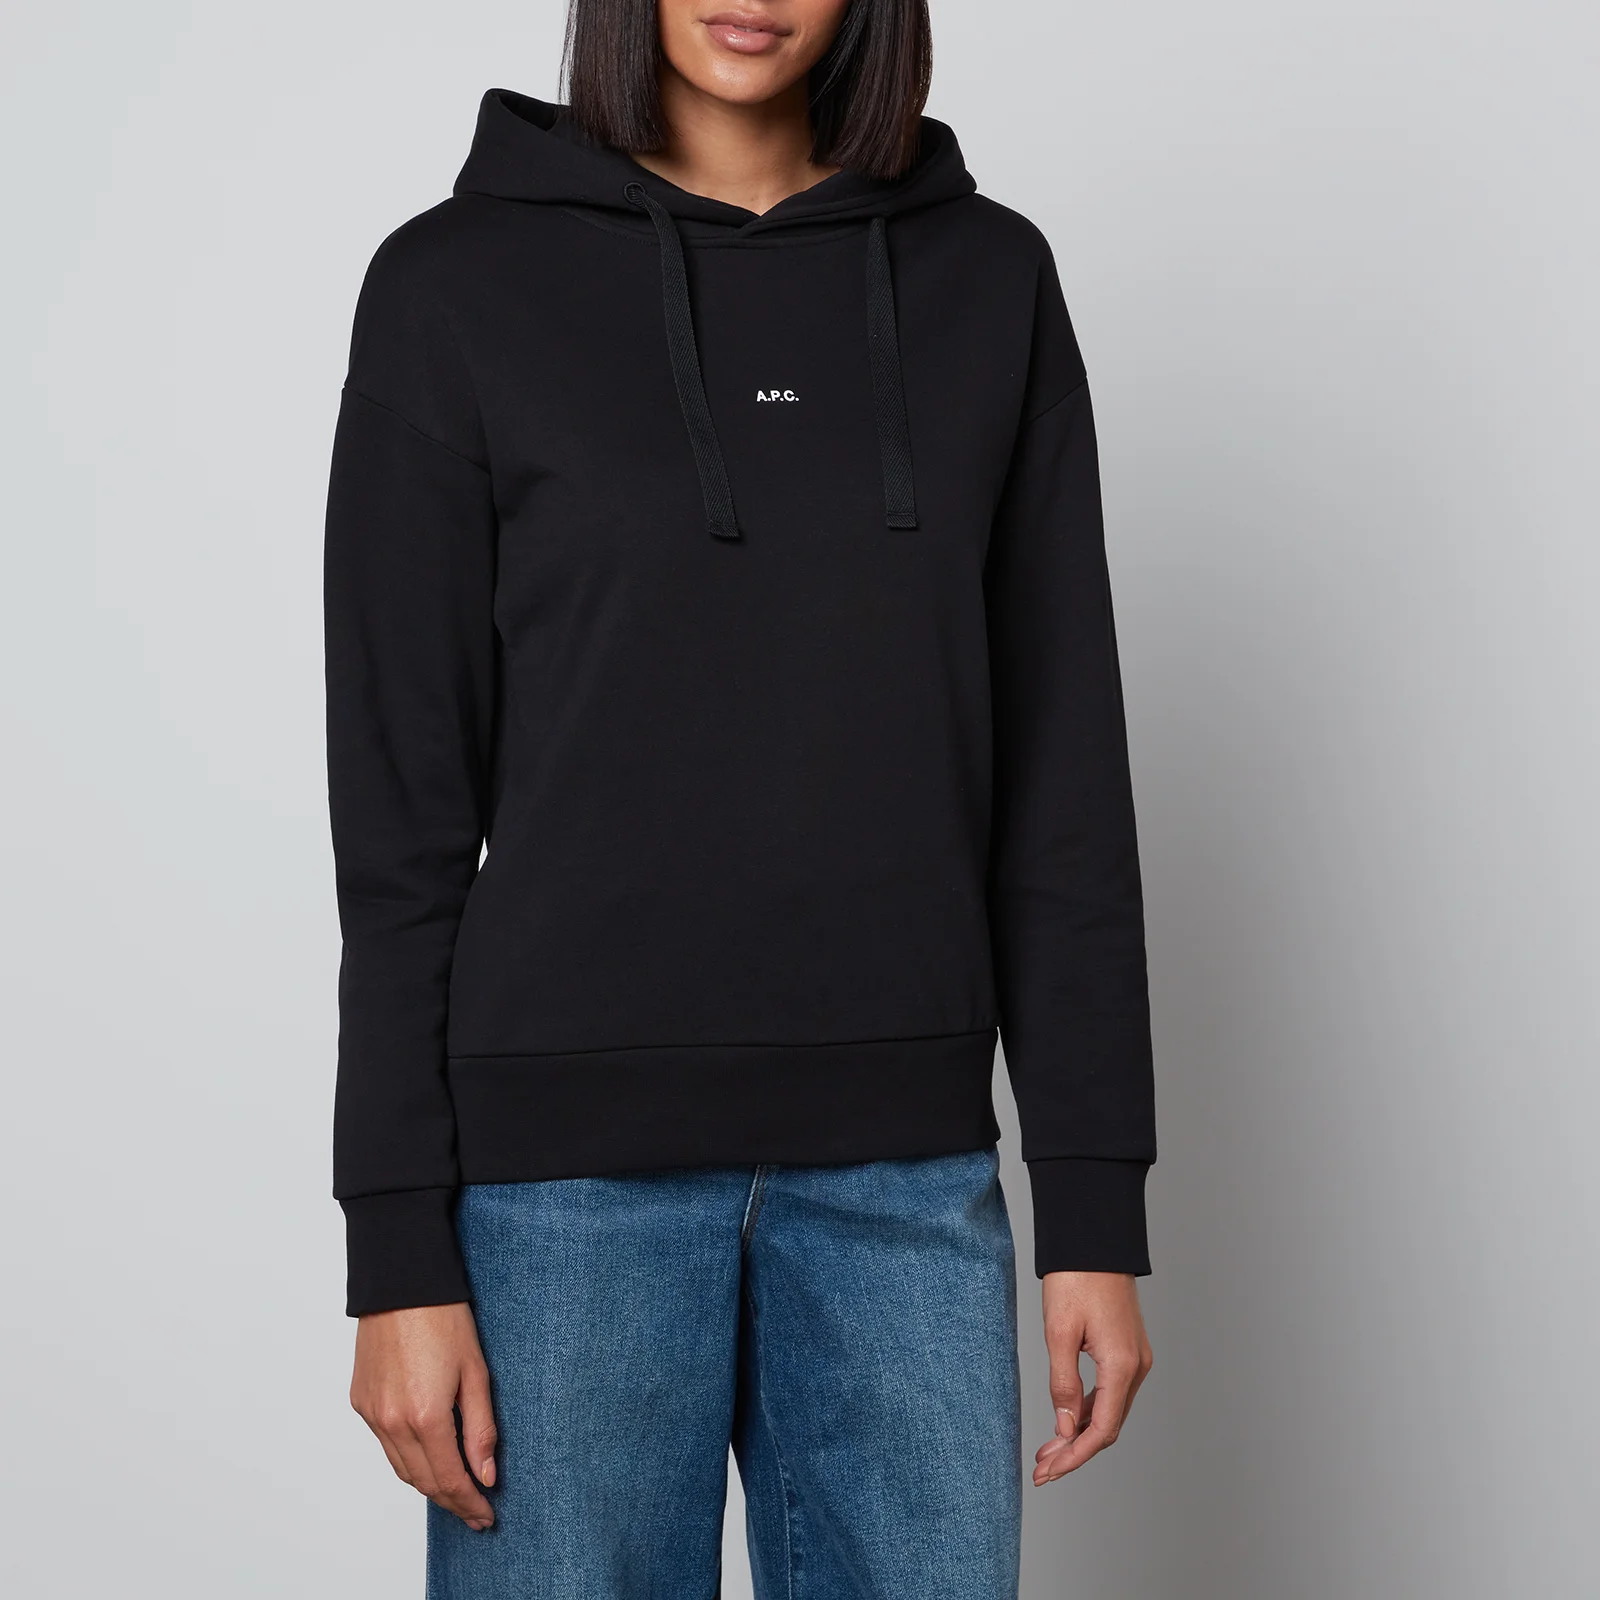 A.P.C. Christina Logo-Embroidered Cotton-Jersey Hoodie Image 1